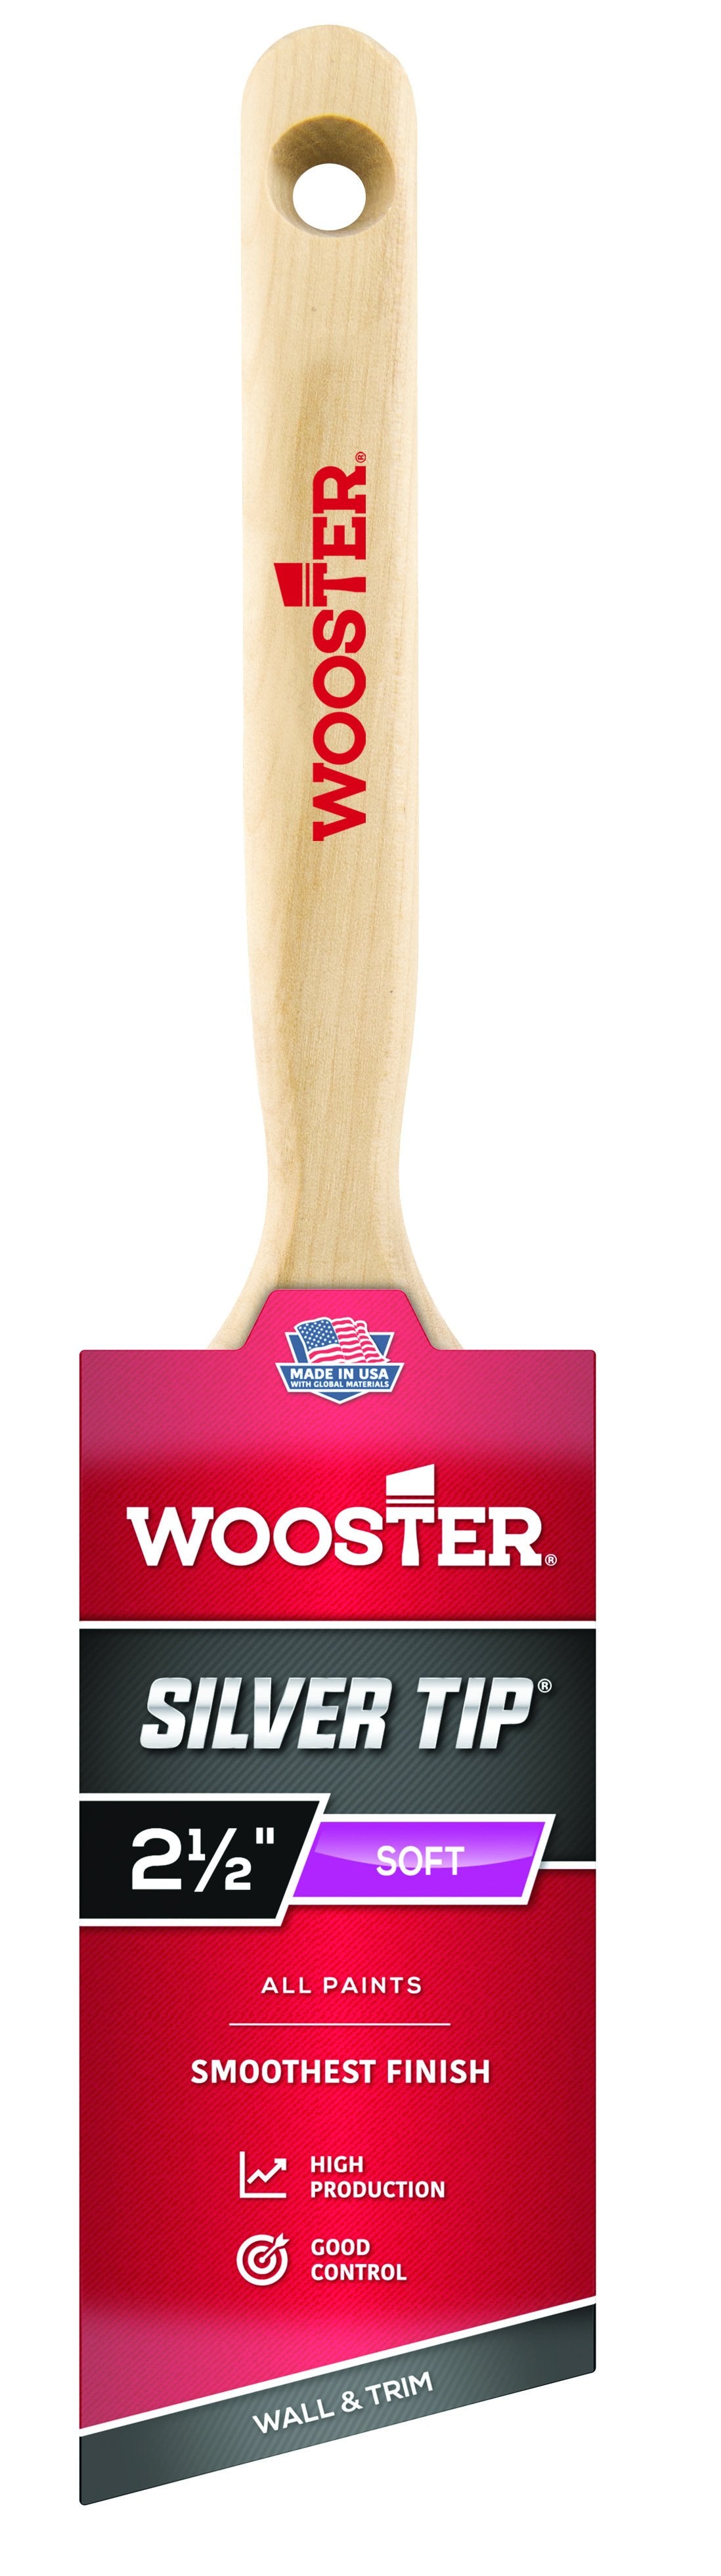 Wooster Silver Tip® Soft Bristle Paint Brush - Various Sizes